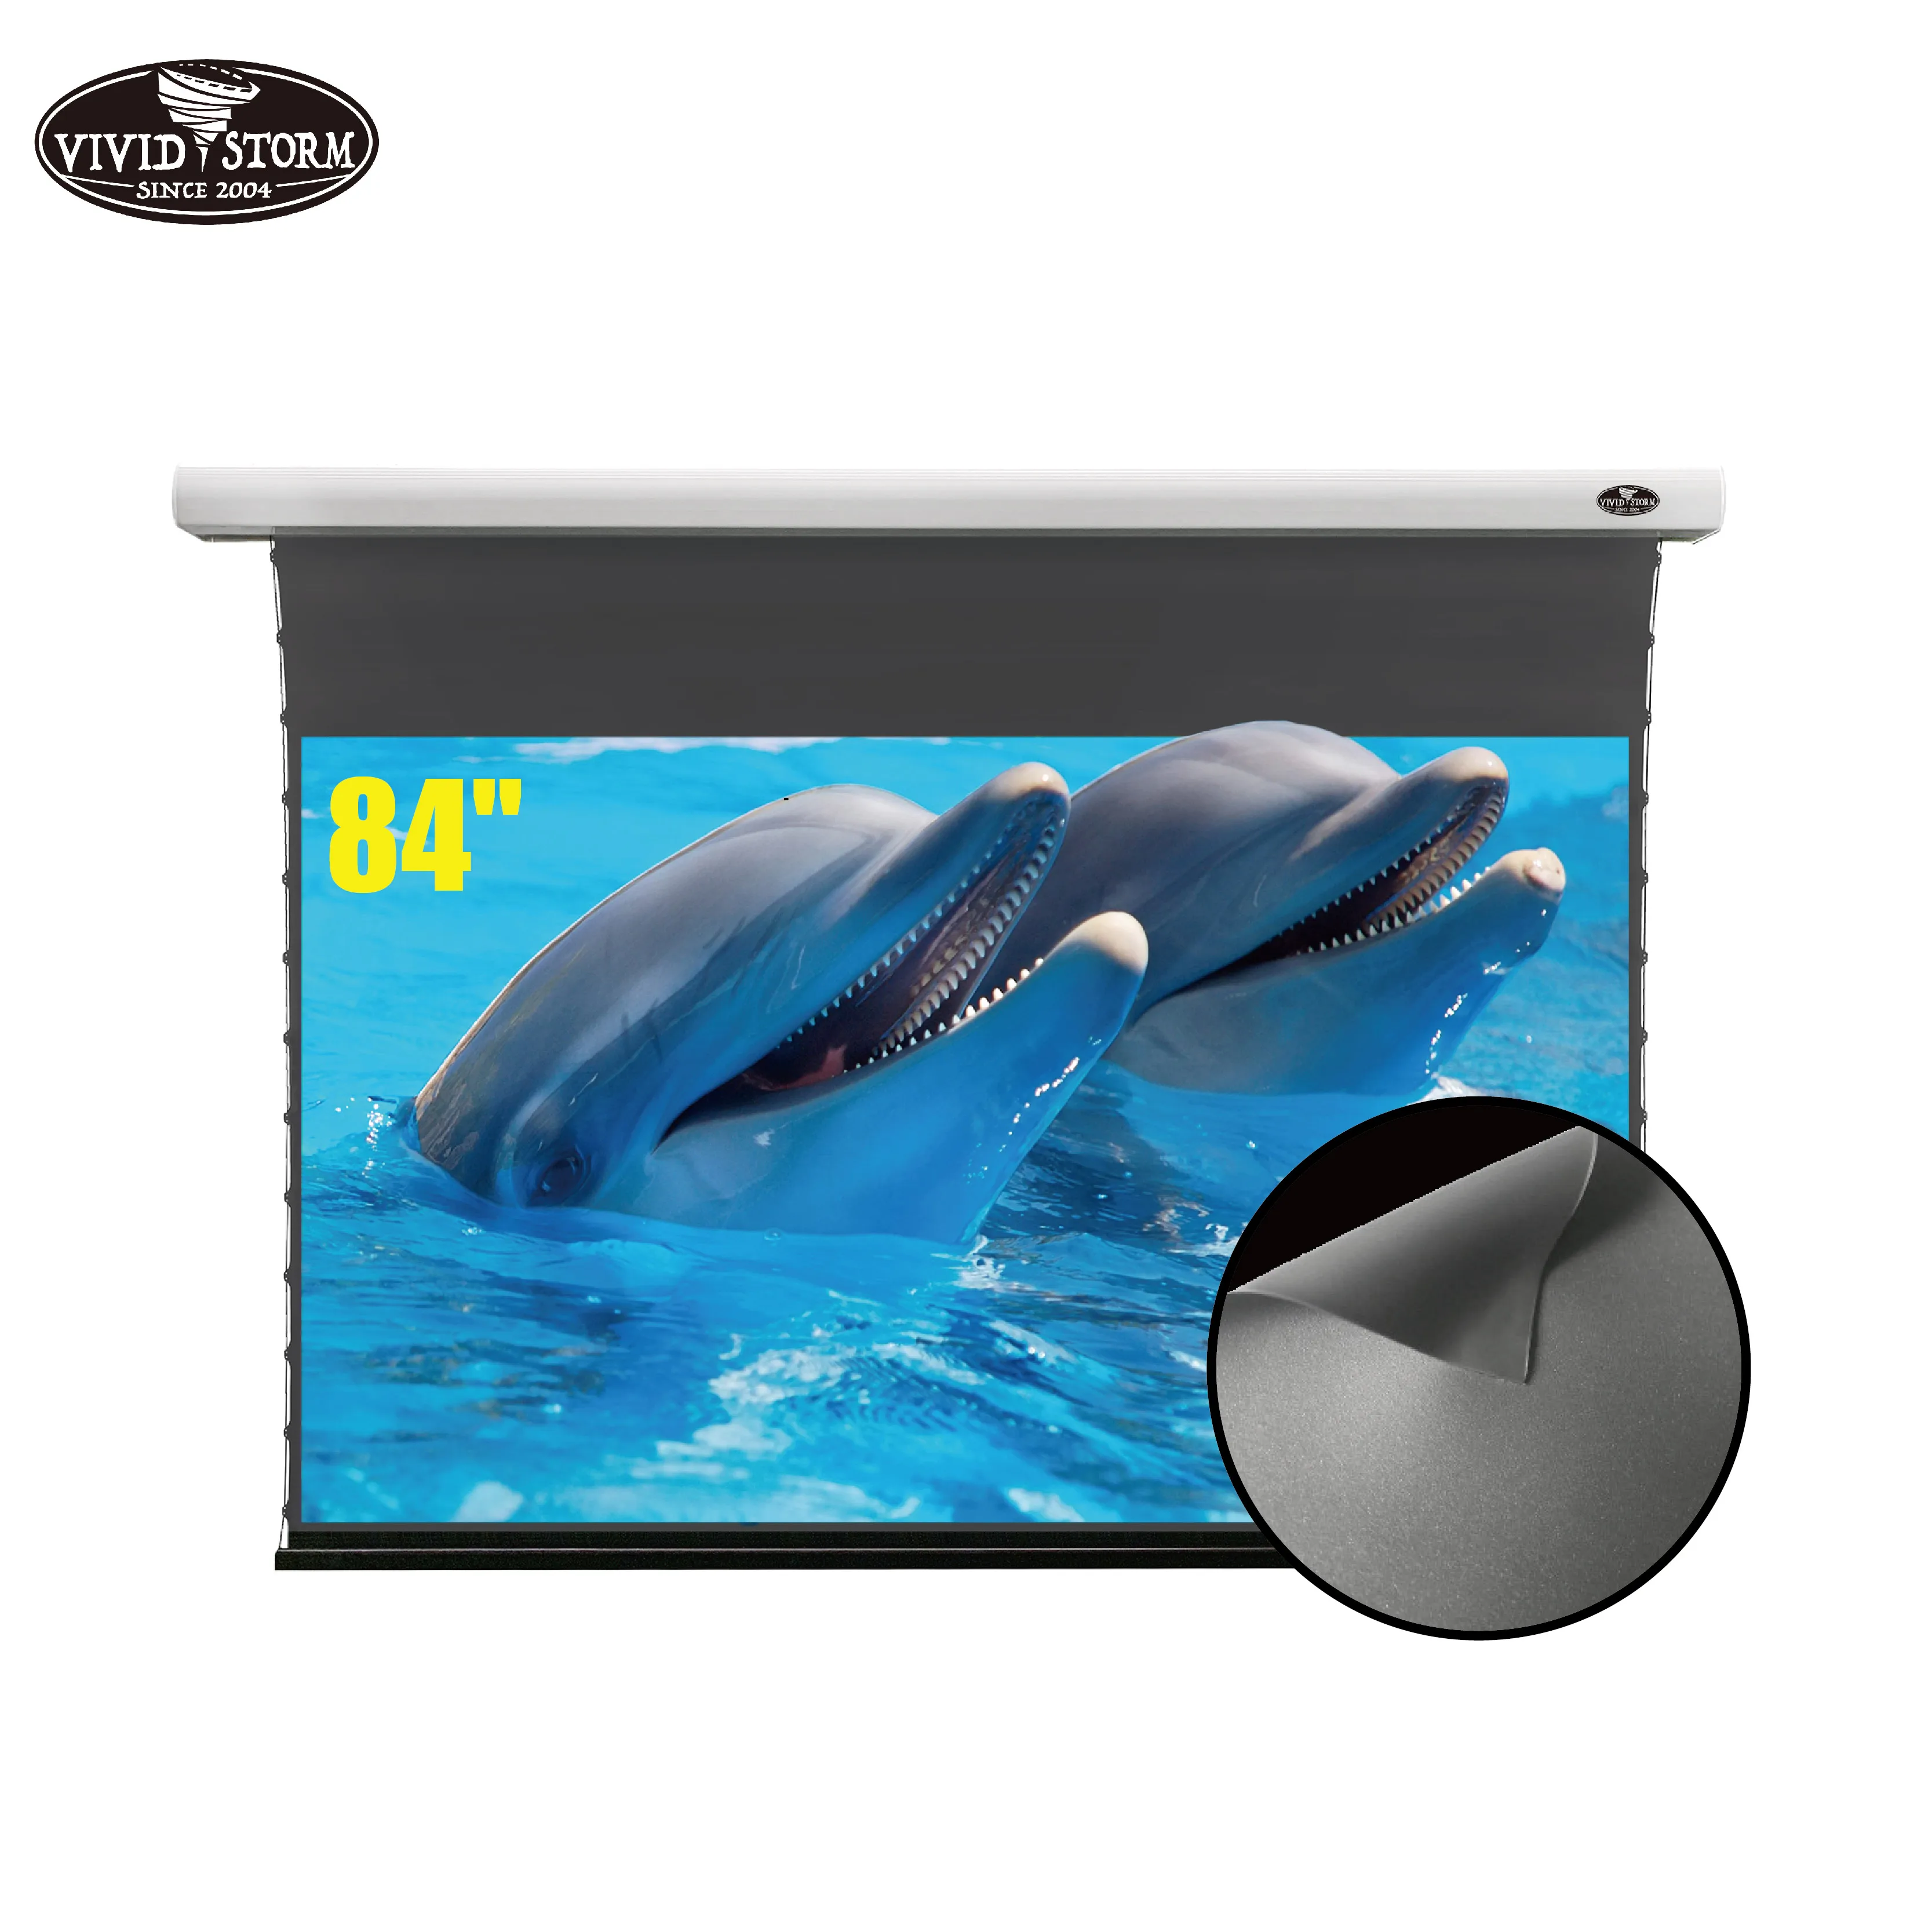 

VIVIDSTORM Slimline Electric Tab-tensioned Drop Down Screen, 84-inch 16:9 Ceiling and Wall,Ambient Light Rejecting VMSLALR84H